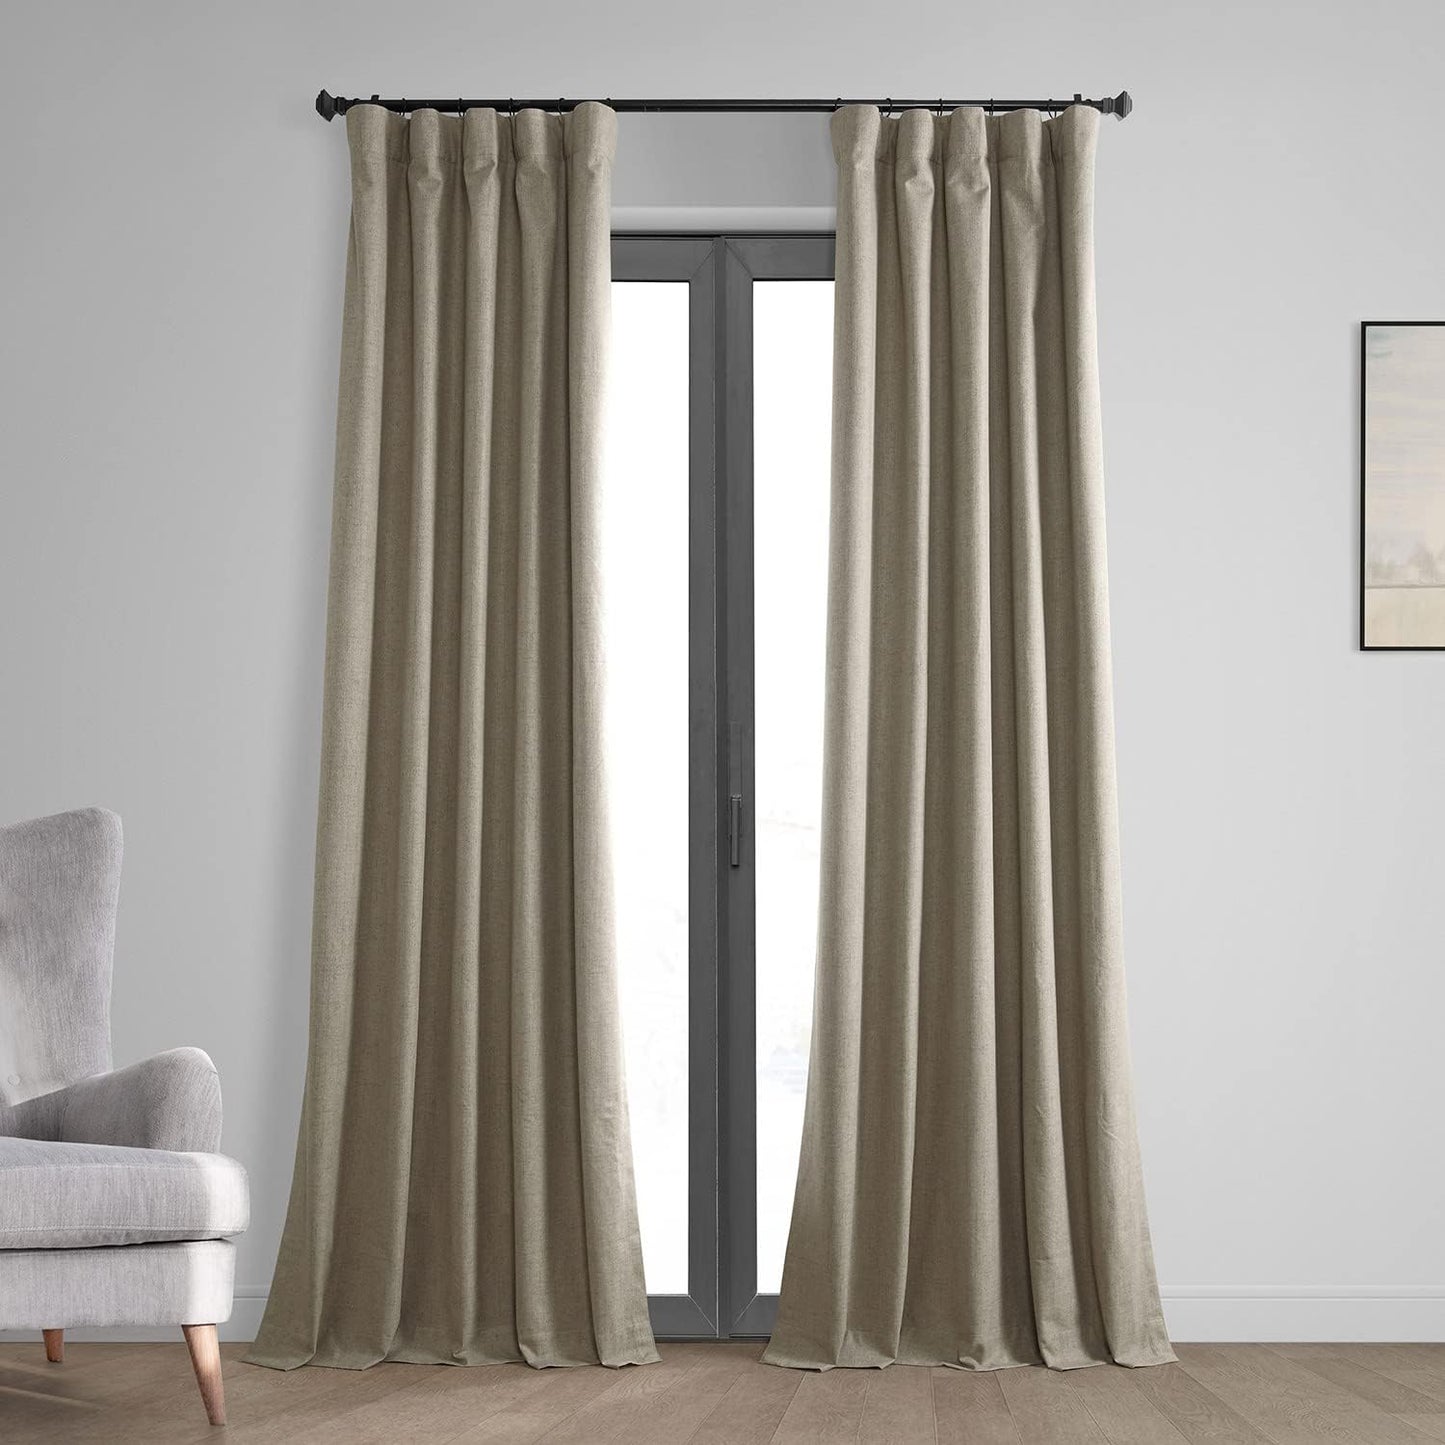 HPD Half Price Drapes Vintage Blackout Curtains for Bedroom - 96 Inches Long Thermal Cross Linen Weave Full Light Blocking 1 Panel Blackout Curtain, (50W X 96L), Millennial Grey  Exclusive Fabrics & Furnishings Warm Taupe 50W X 108L 